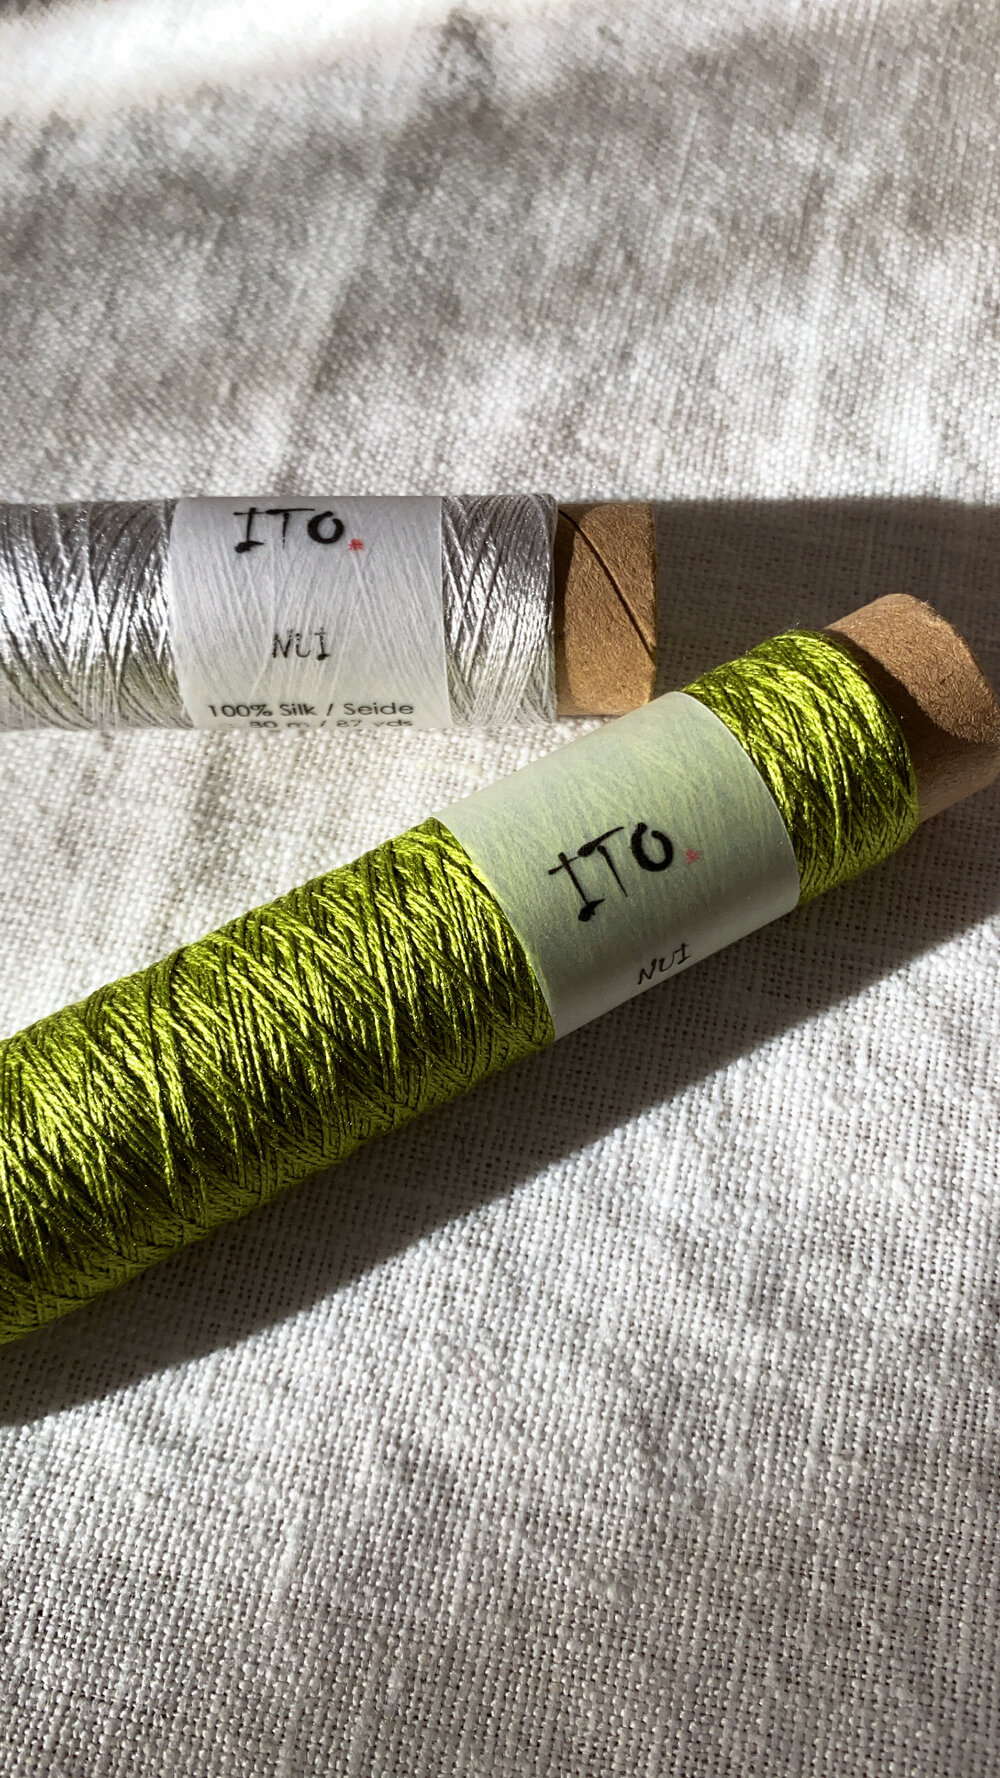 Ito Nui Silk Embroidery Thread — Judith & Lily